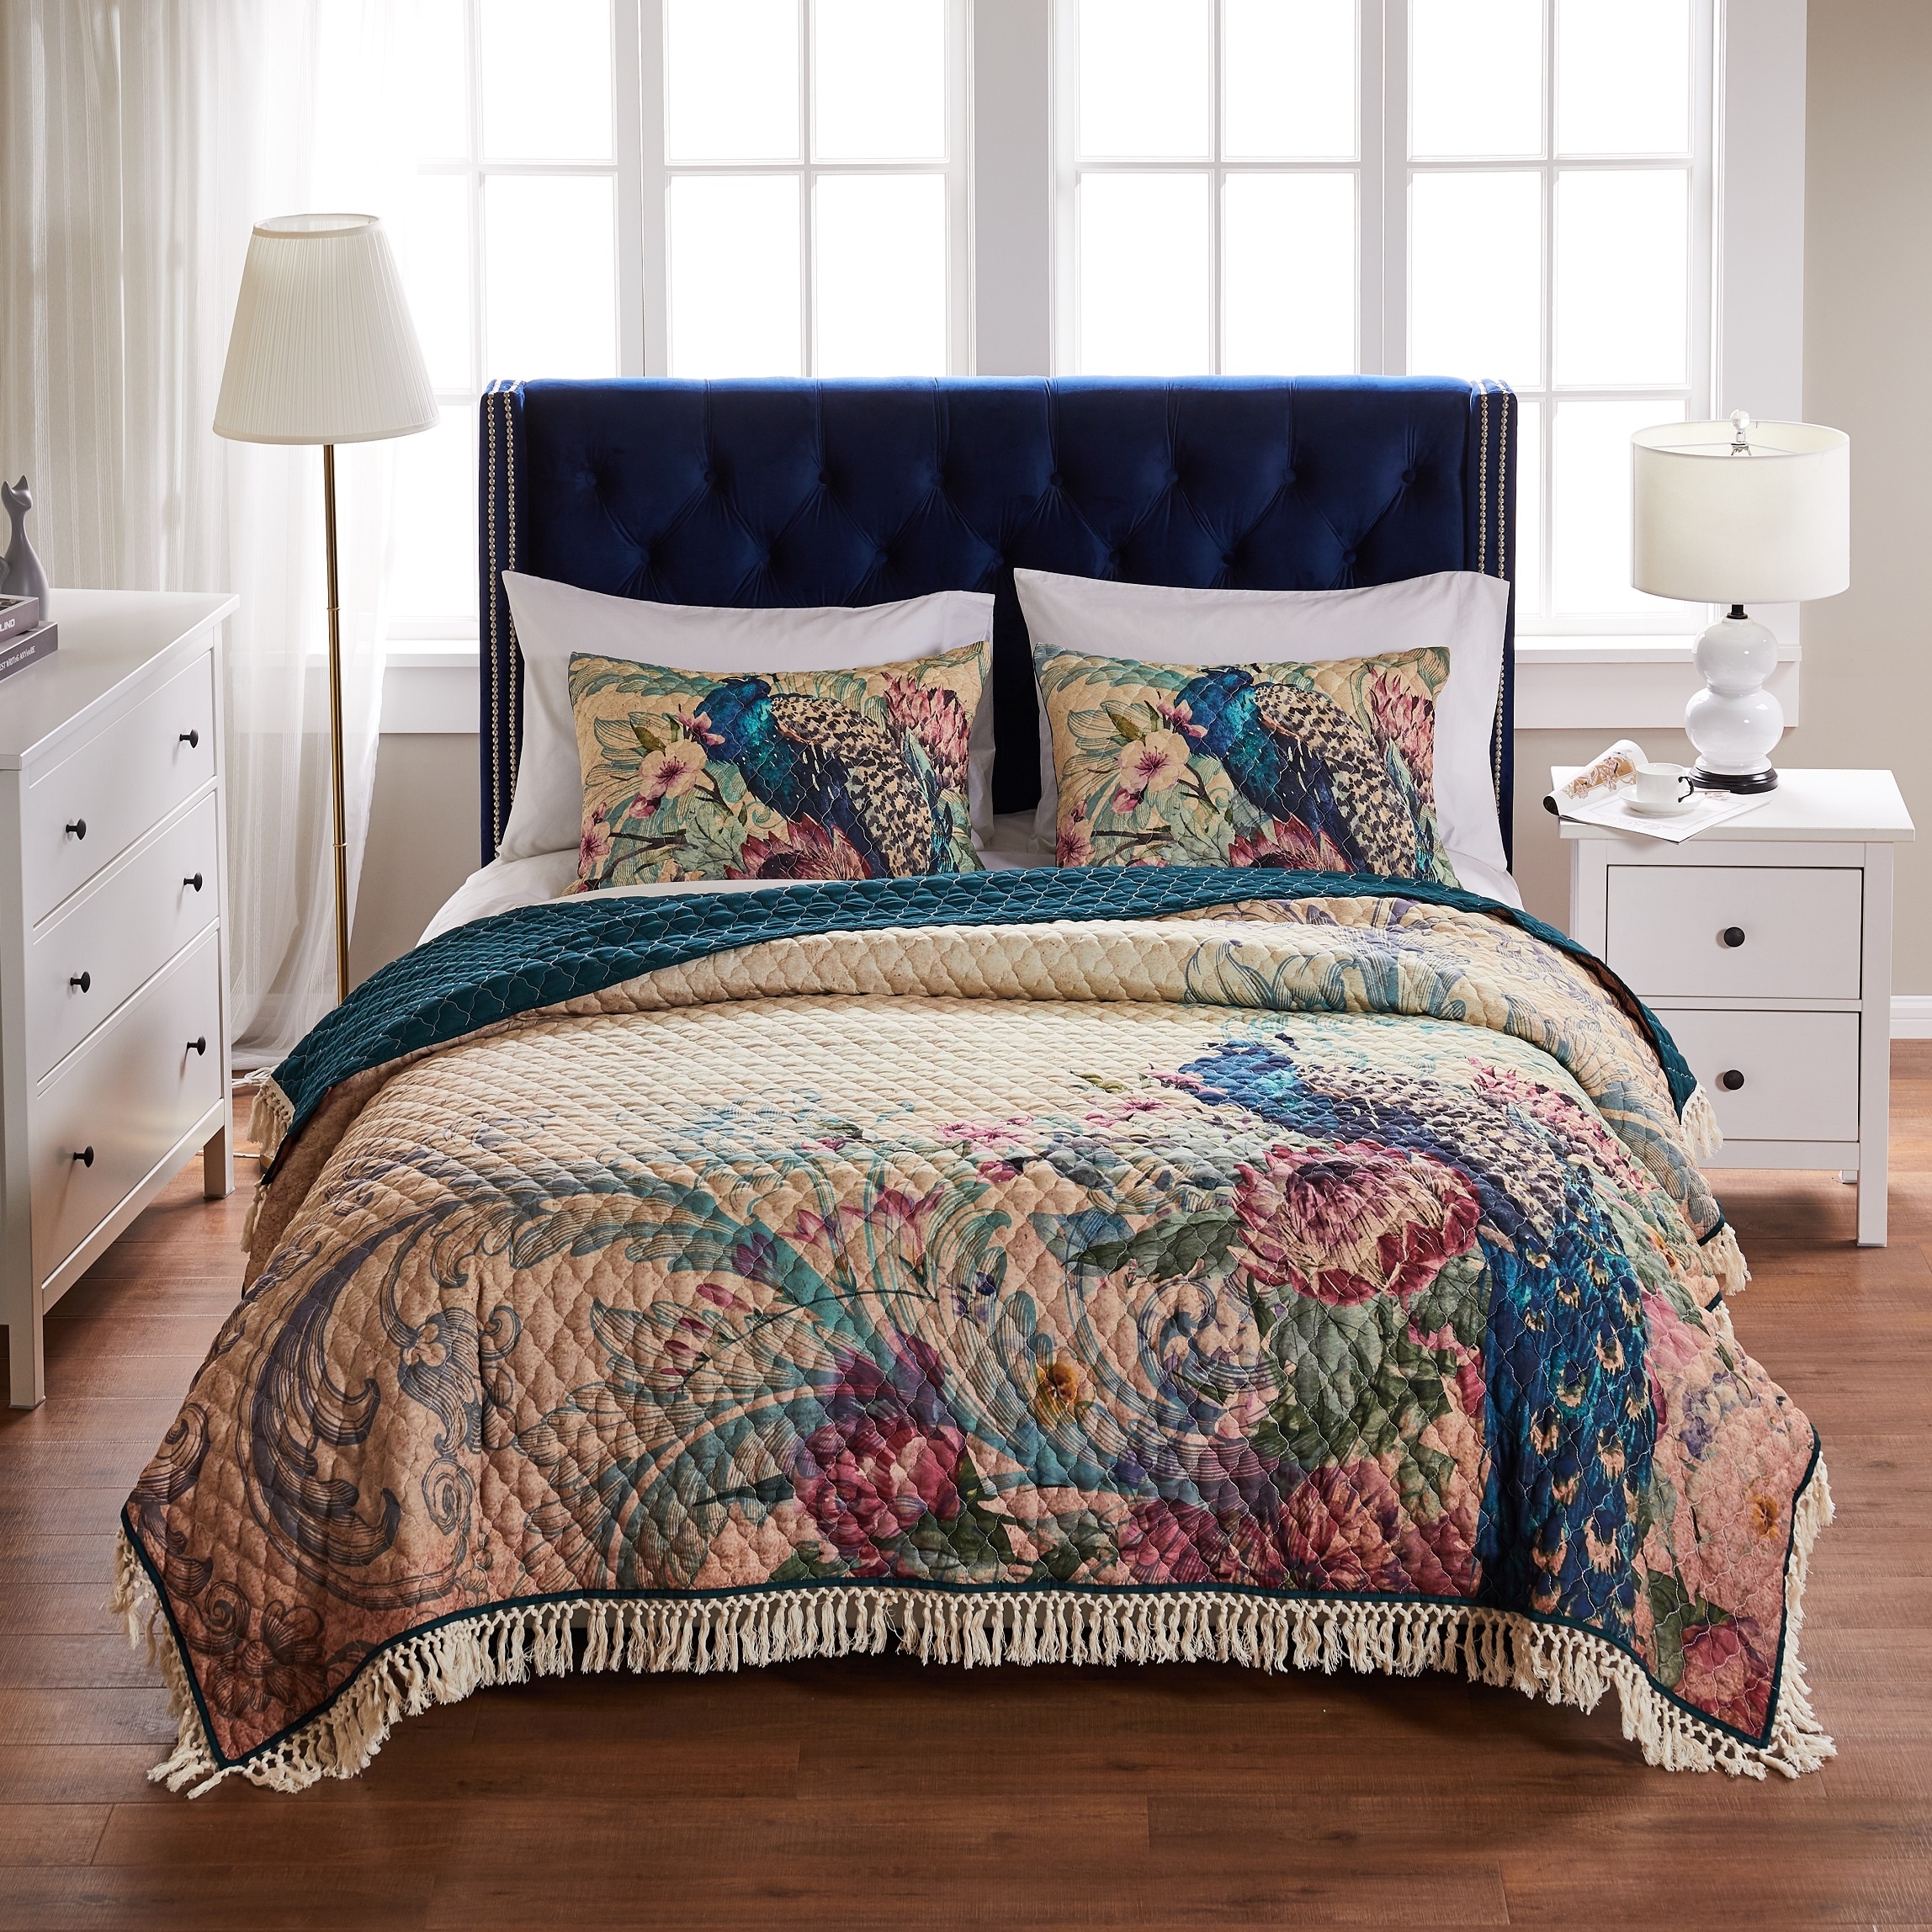 Bohemian & Eclectic Barefoot Bungalow Quilts and Bedspreads - Bed